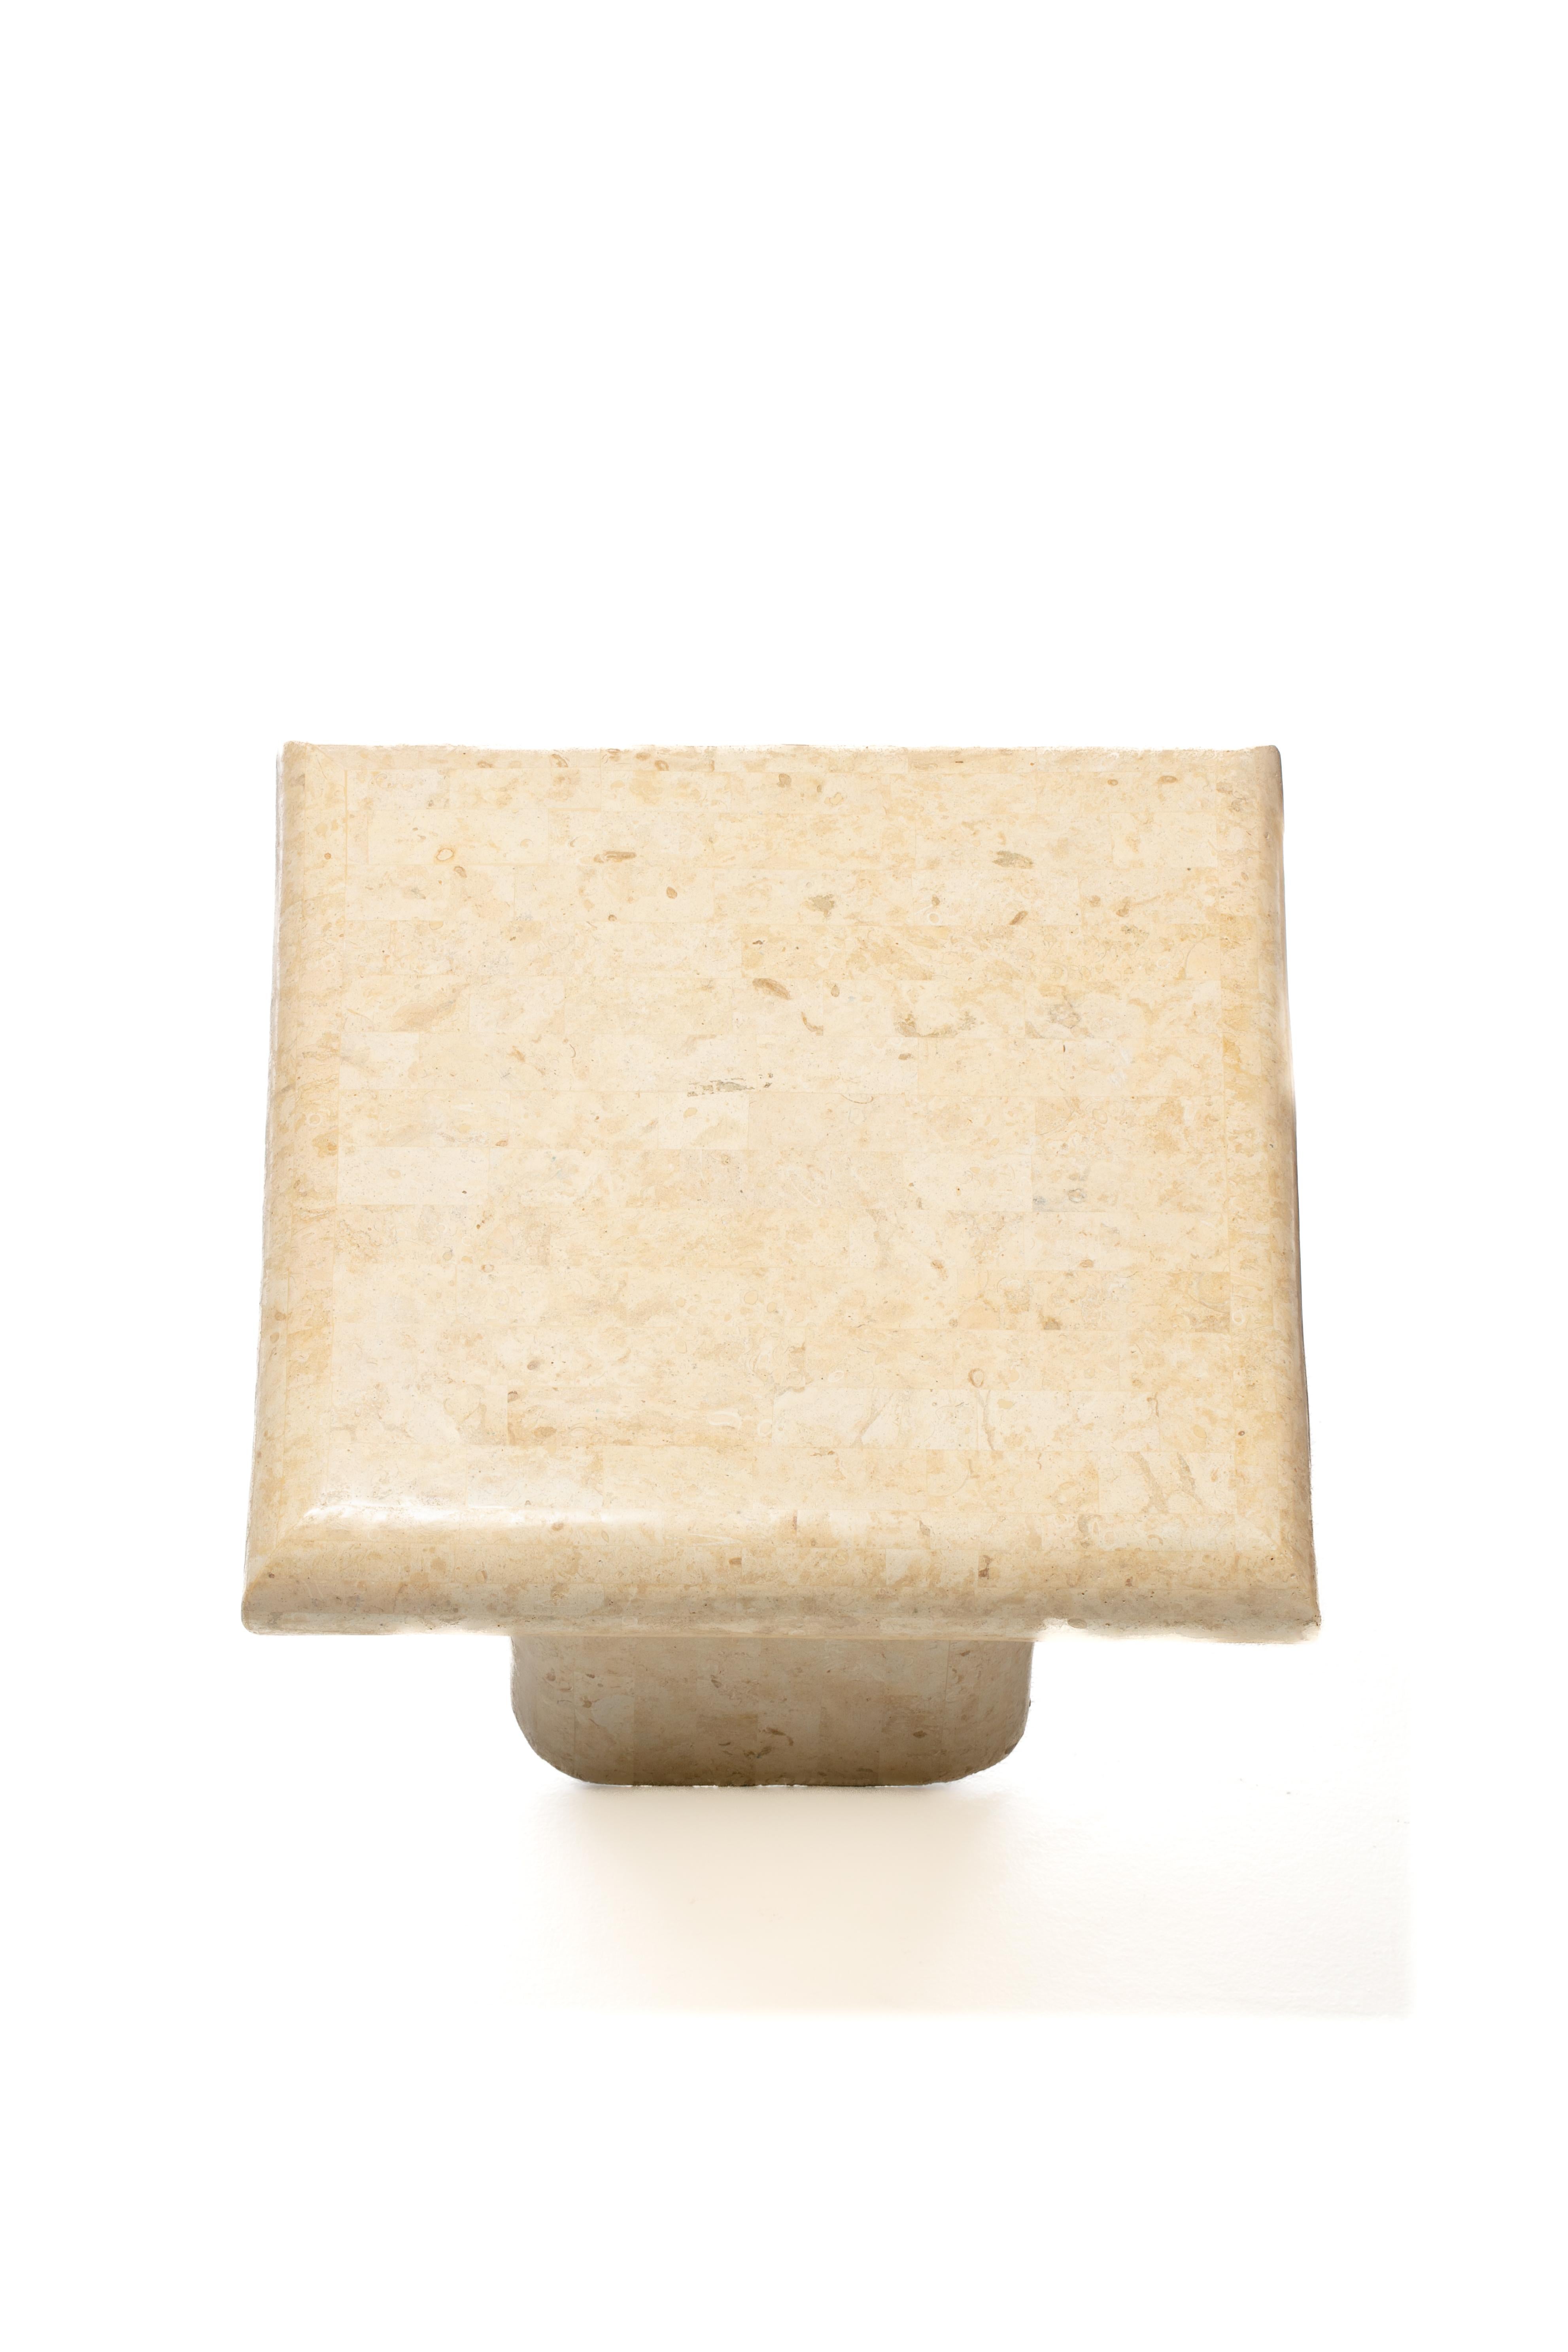 Pair of Post Modern Travertine End Tables, circa 1980s For Sale 1